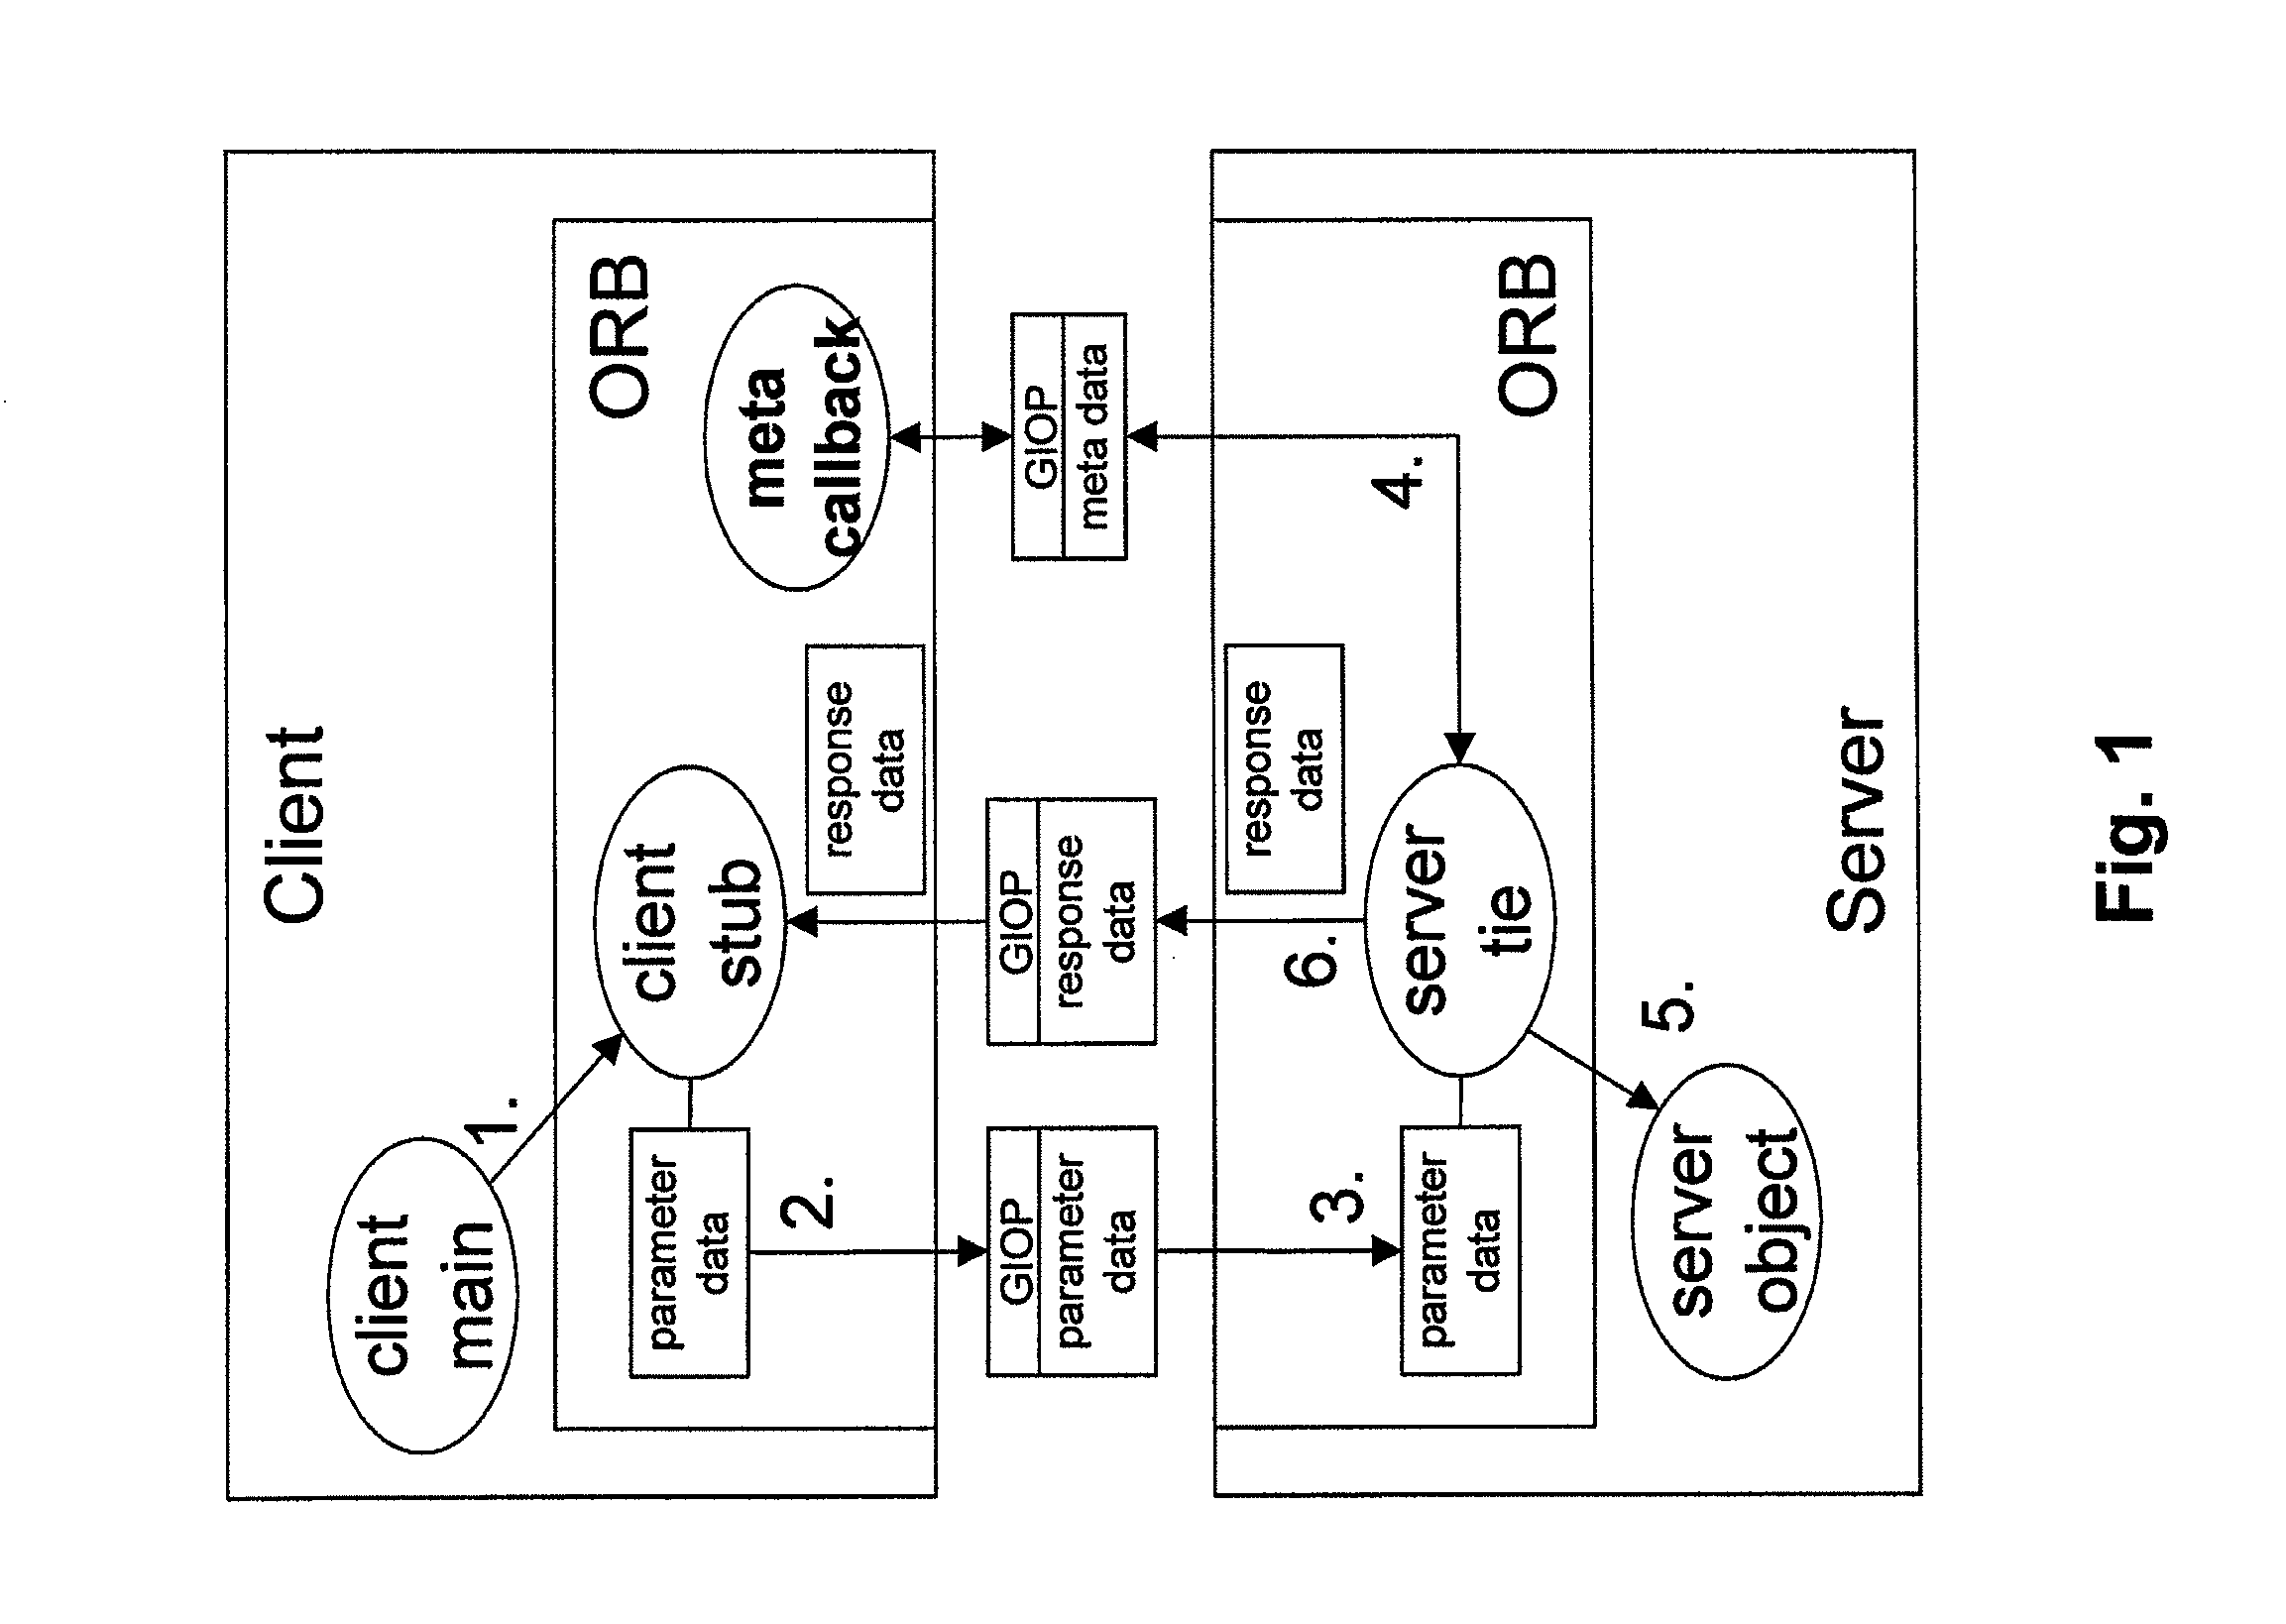 Pre-population of meta data cache for resolution of data marshaling issues